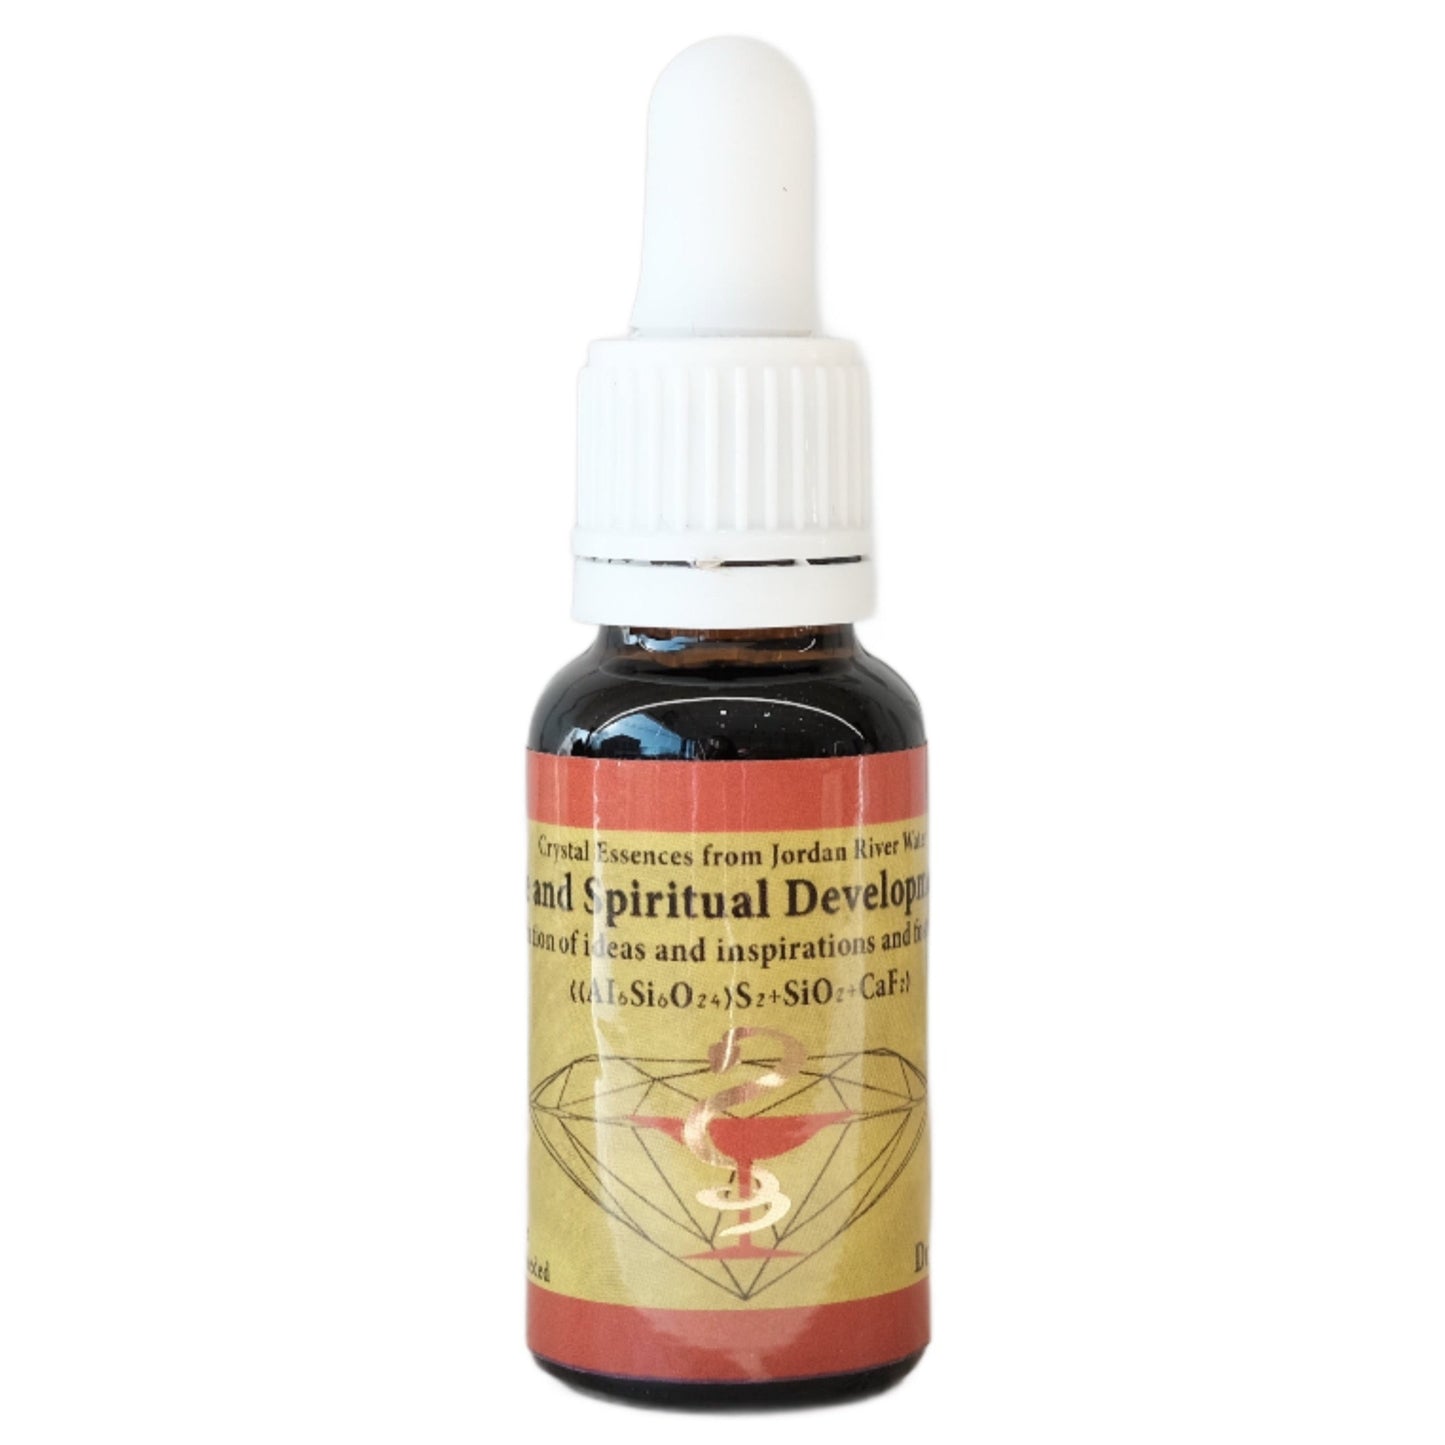 Competence and Spiritual Development and Growth Healing Essence by Dr Gila Gavrielov 50ml